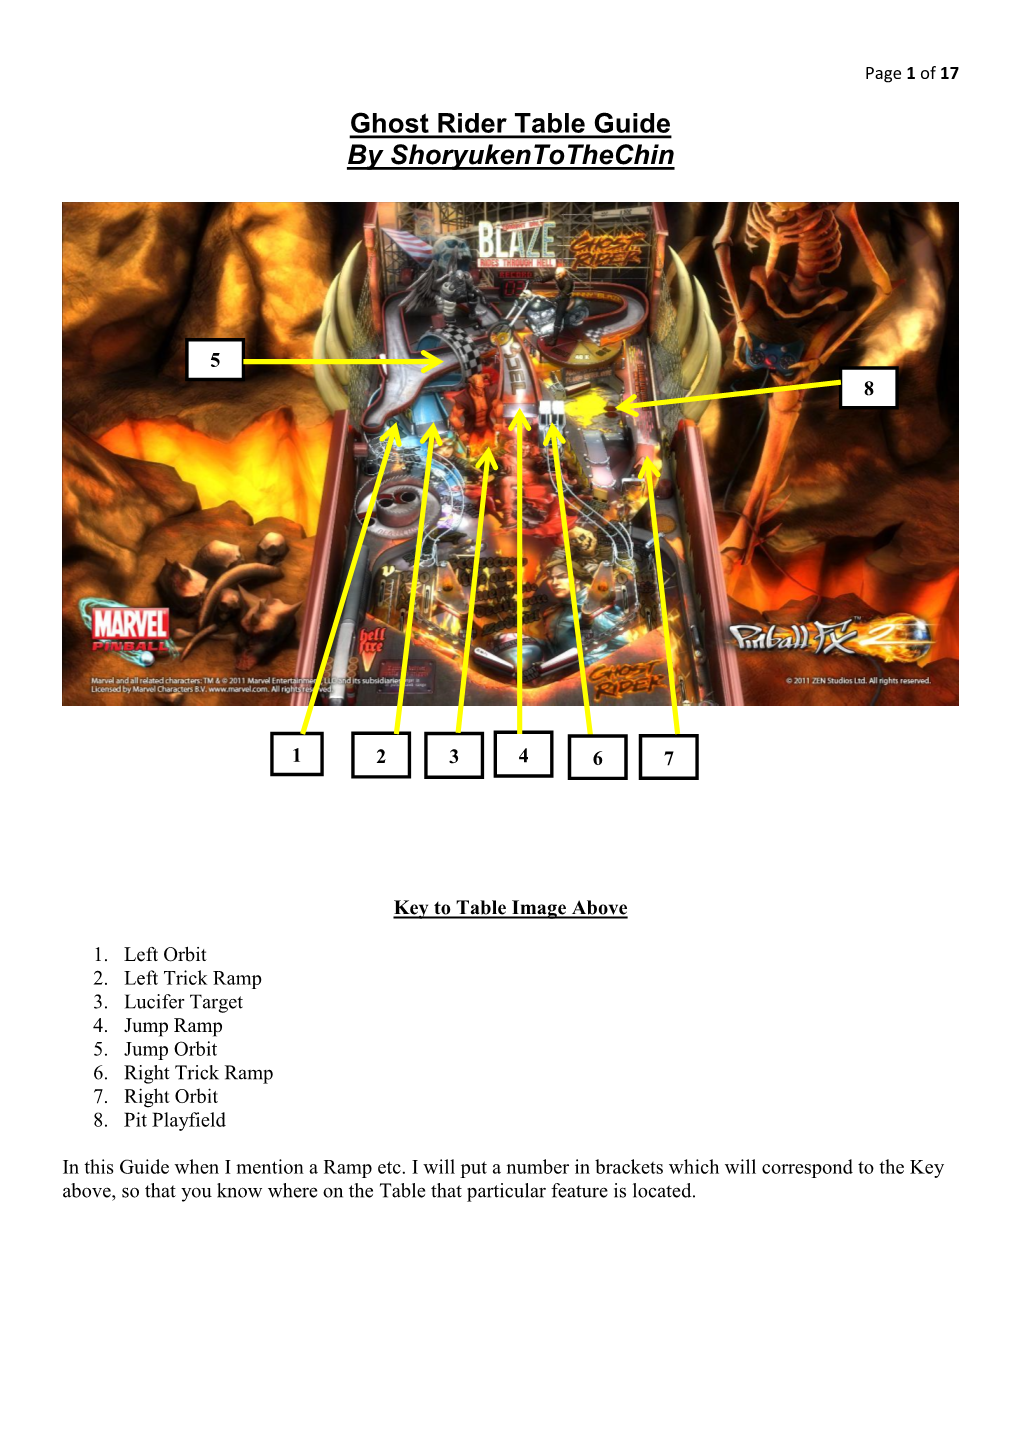 Ghost Rider Table Guide by Shoryukentothechin